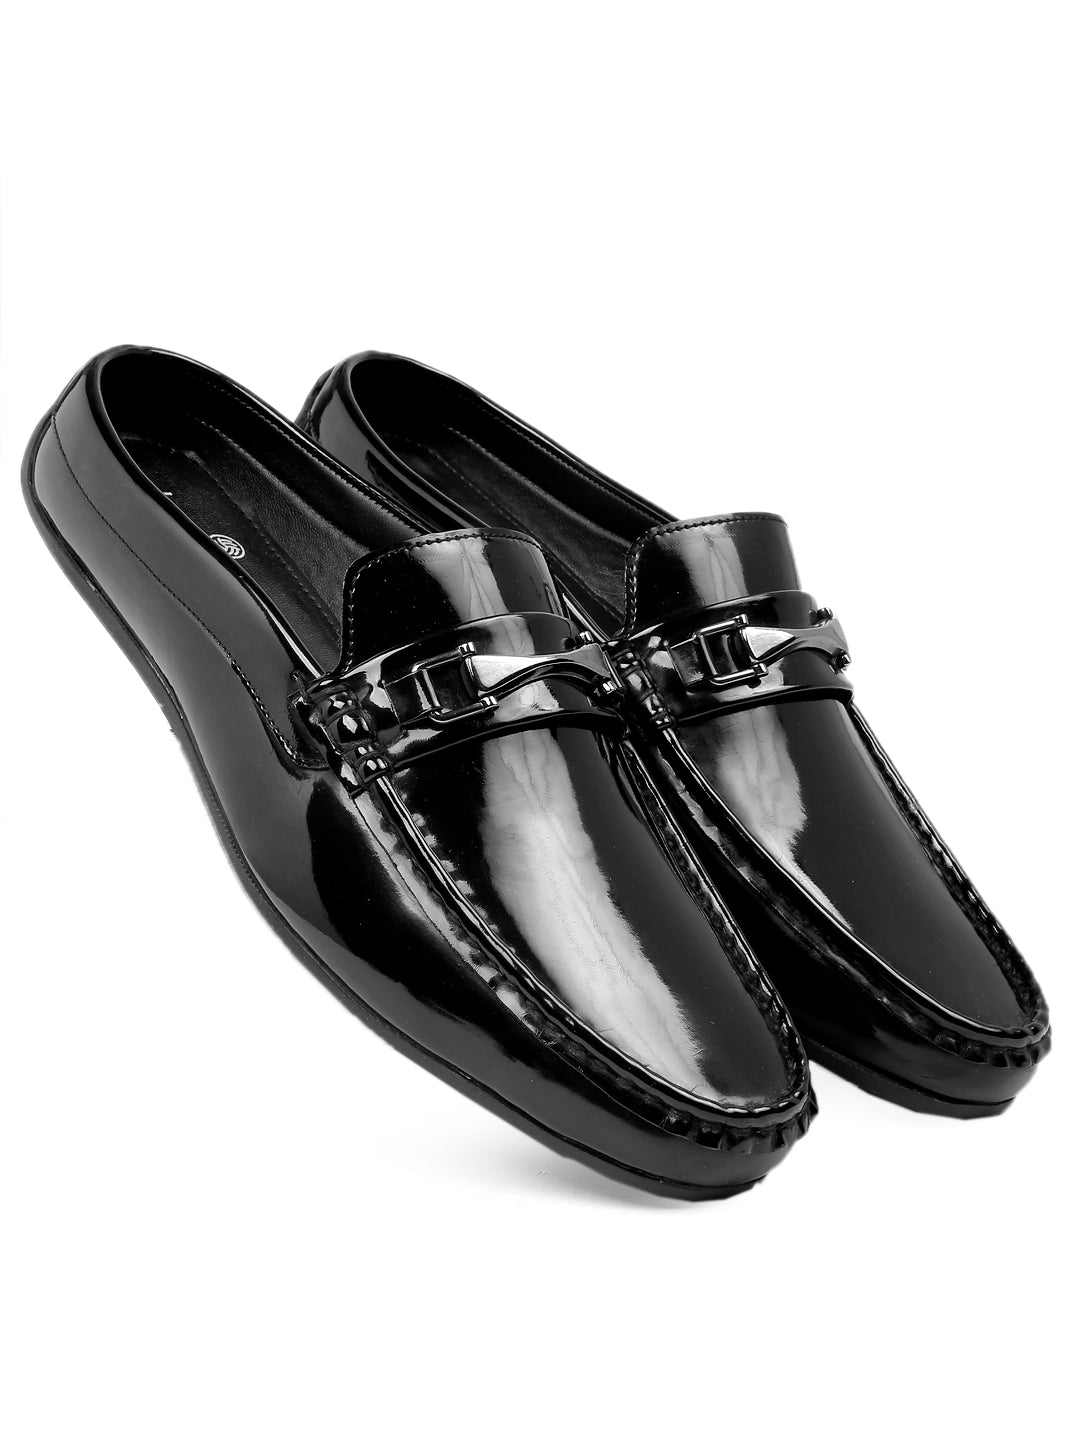 Bacca Bucci JAMBOREE Fashion Mules/Clogs/Backless Loafers for Party/Travel/Office-Shiny Black